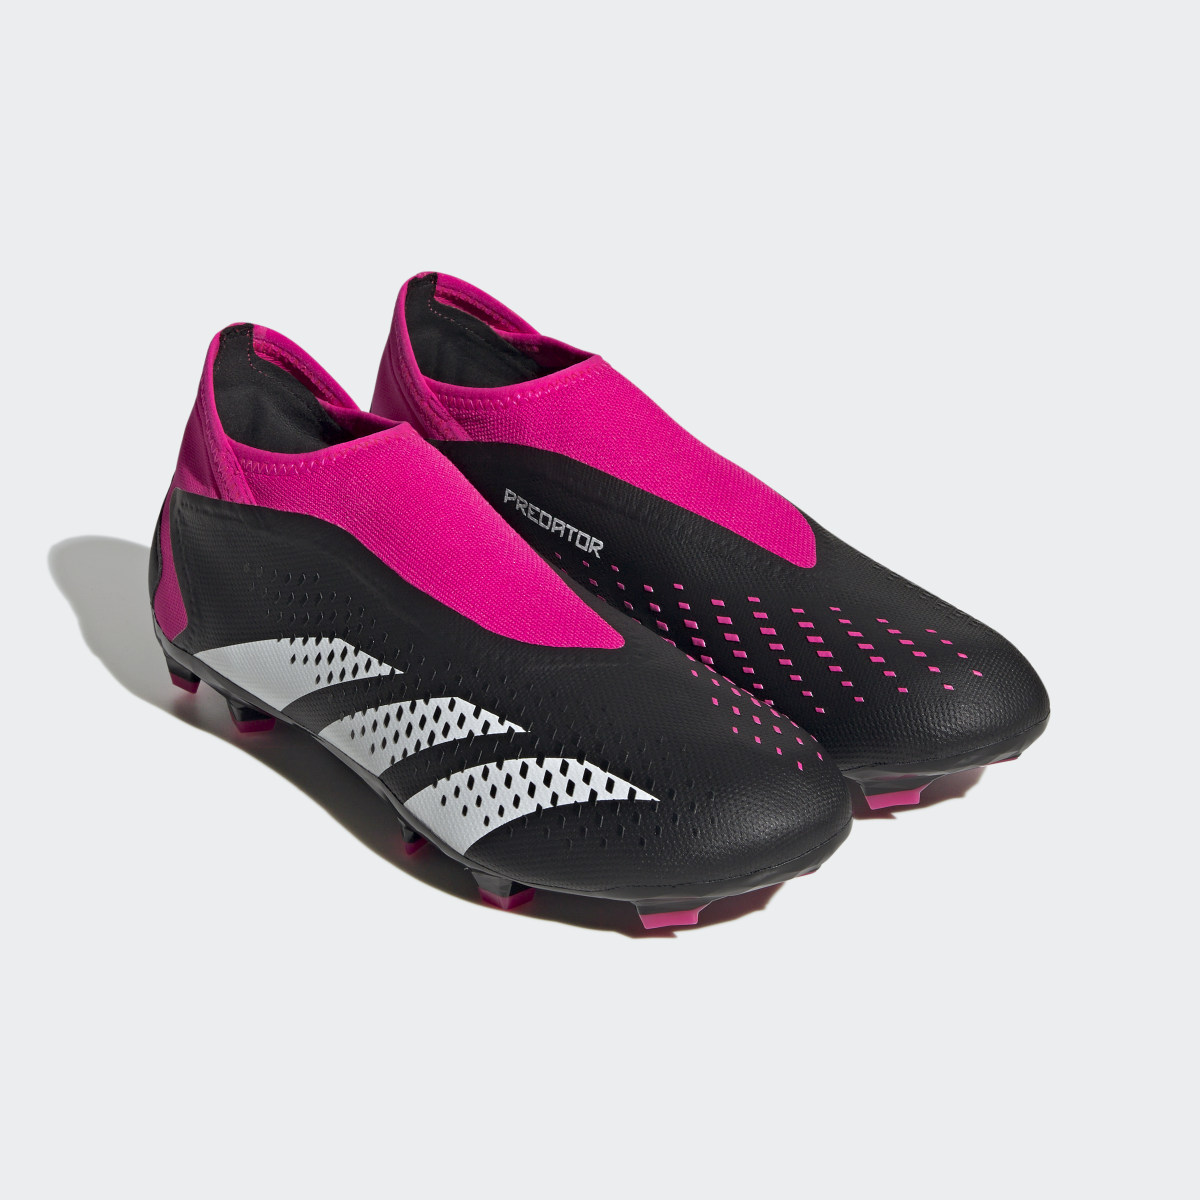 Adidas Predator Accuracy.3 Laceless Firm Ground Cleats. 13